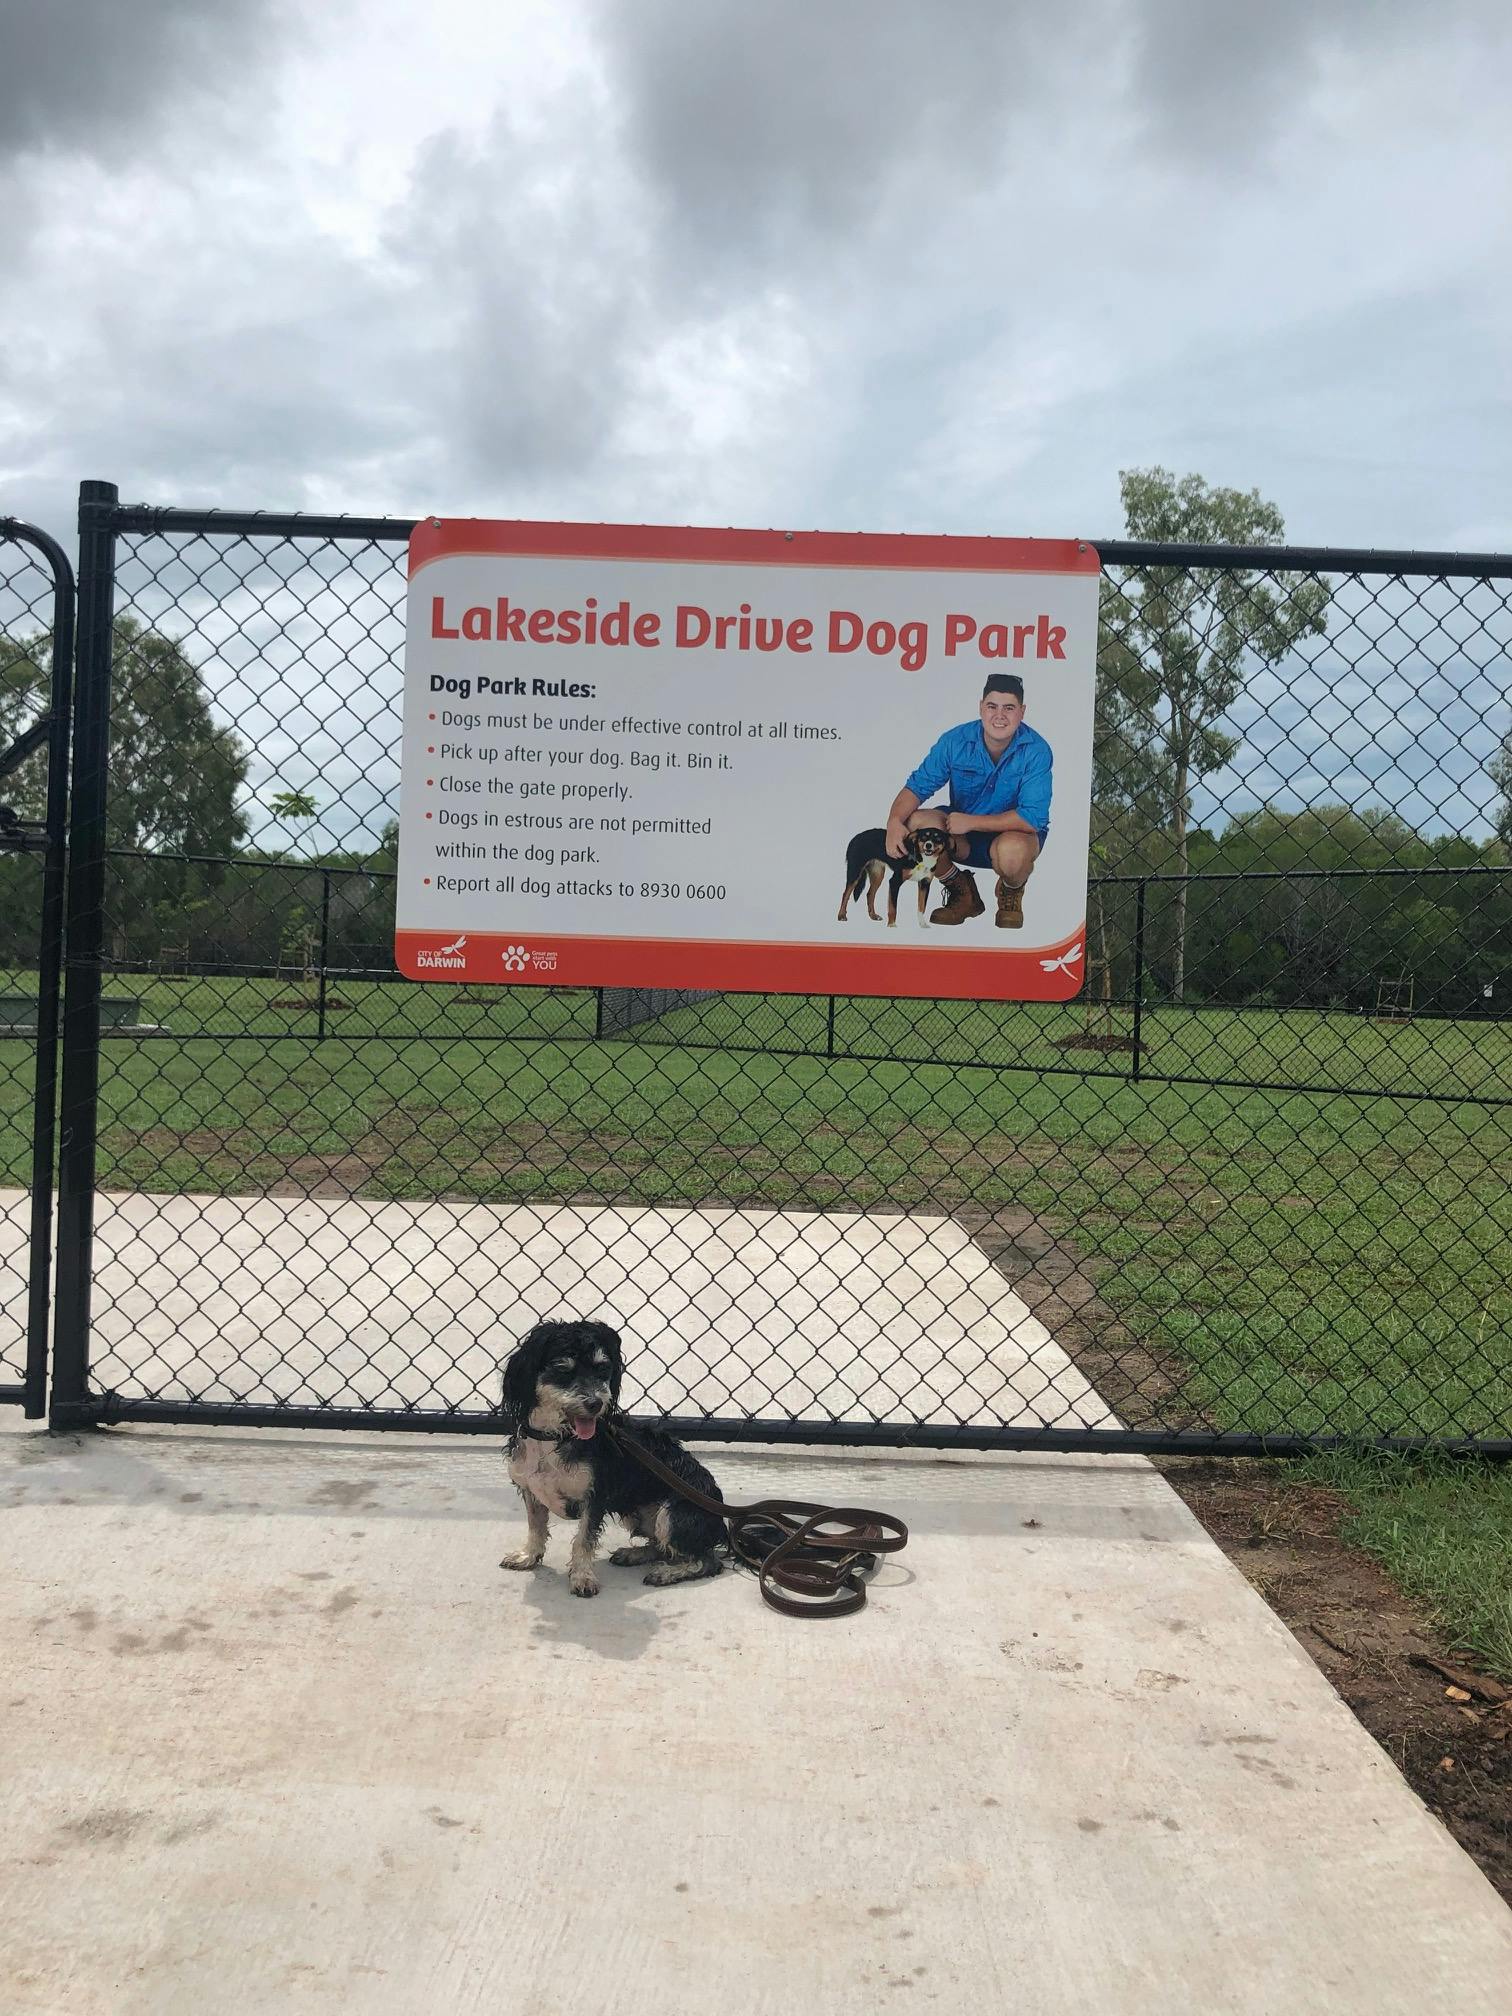 We love obedient Frank who stands patiently in front of the Lakeside Drive Dog Park